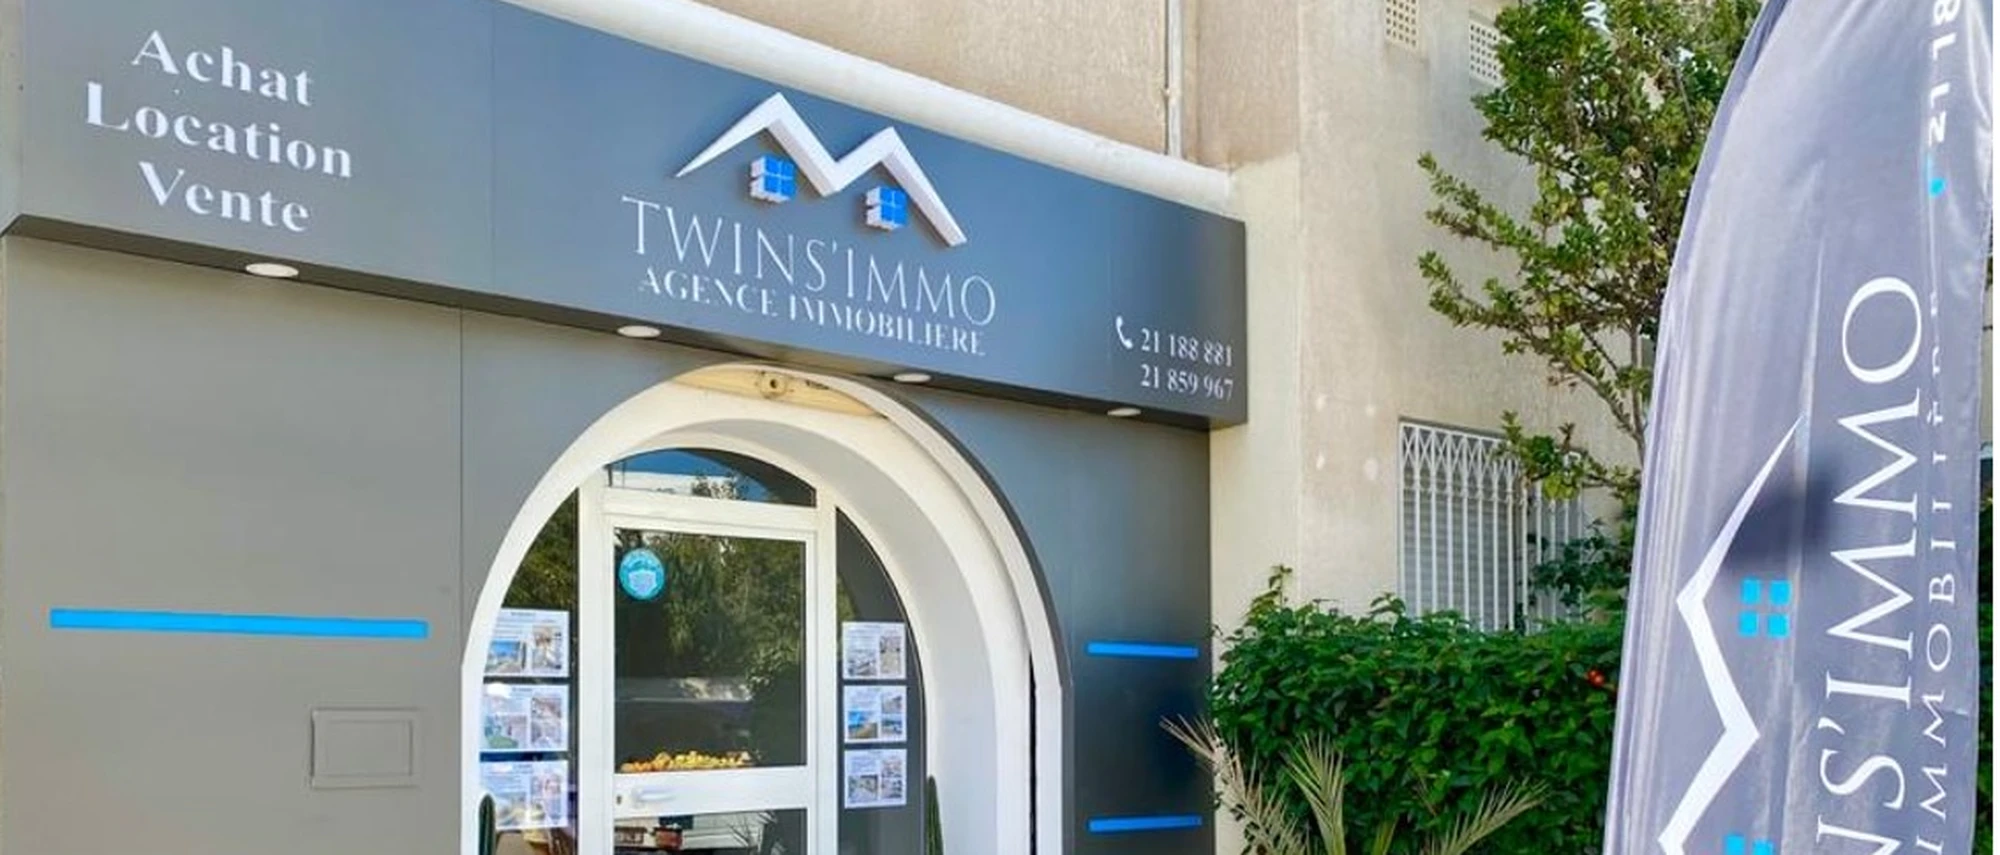 tayara shop cover of Twins immobiliere